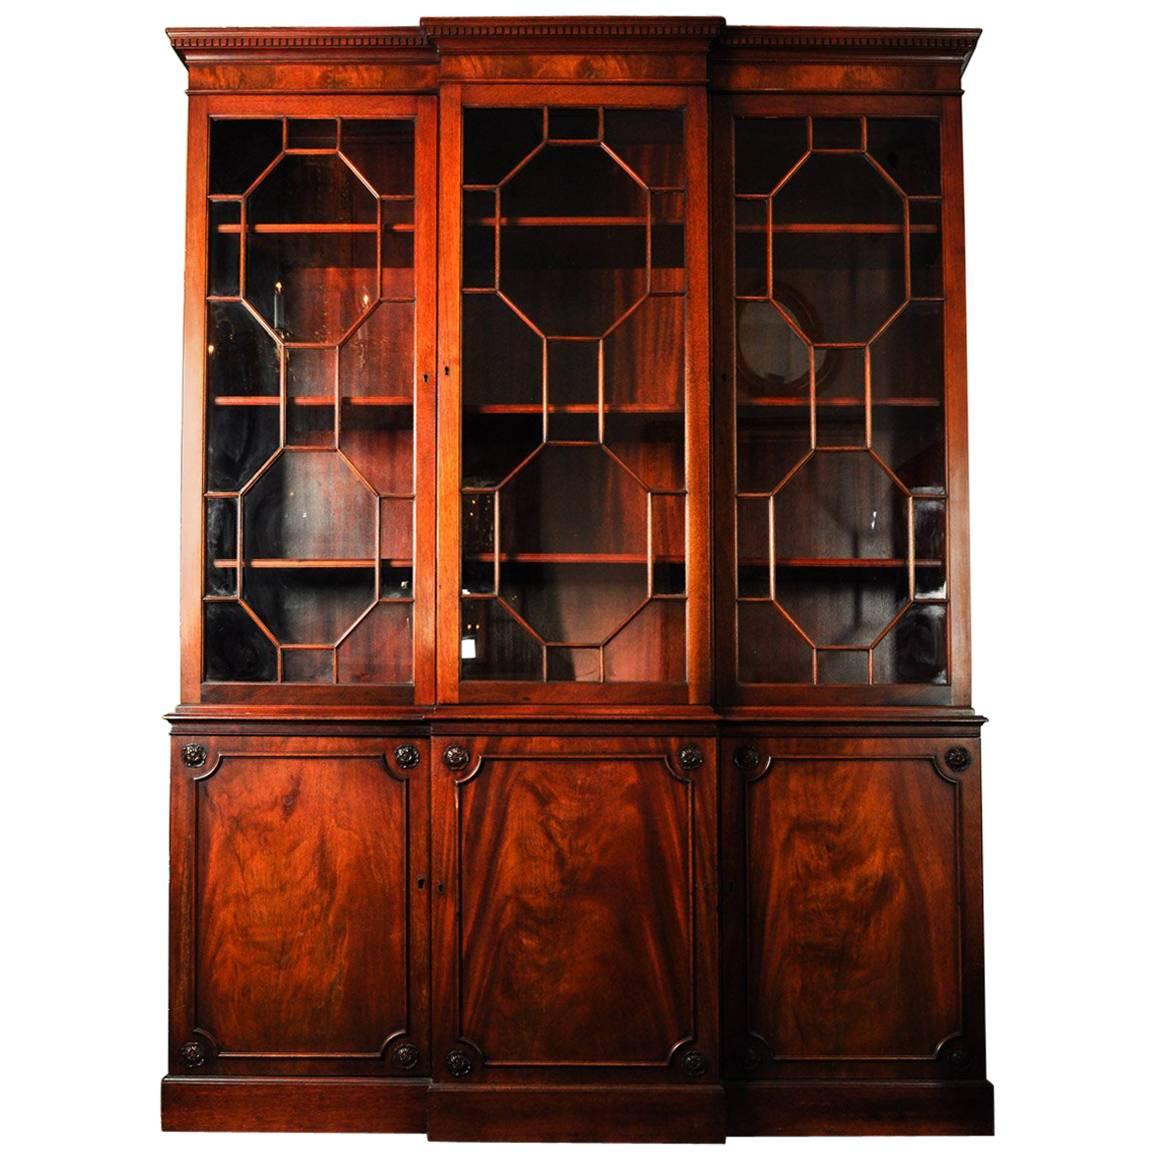 Late 18th-Early 19th Century American Mahogany Wood China Cabinet / Hutch